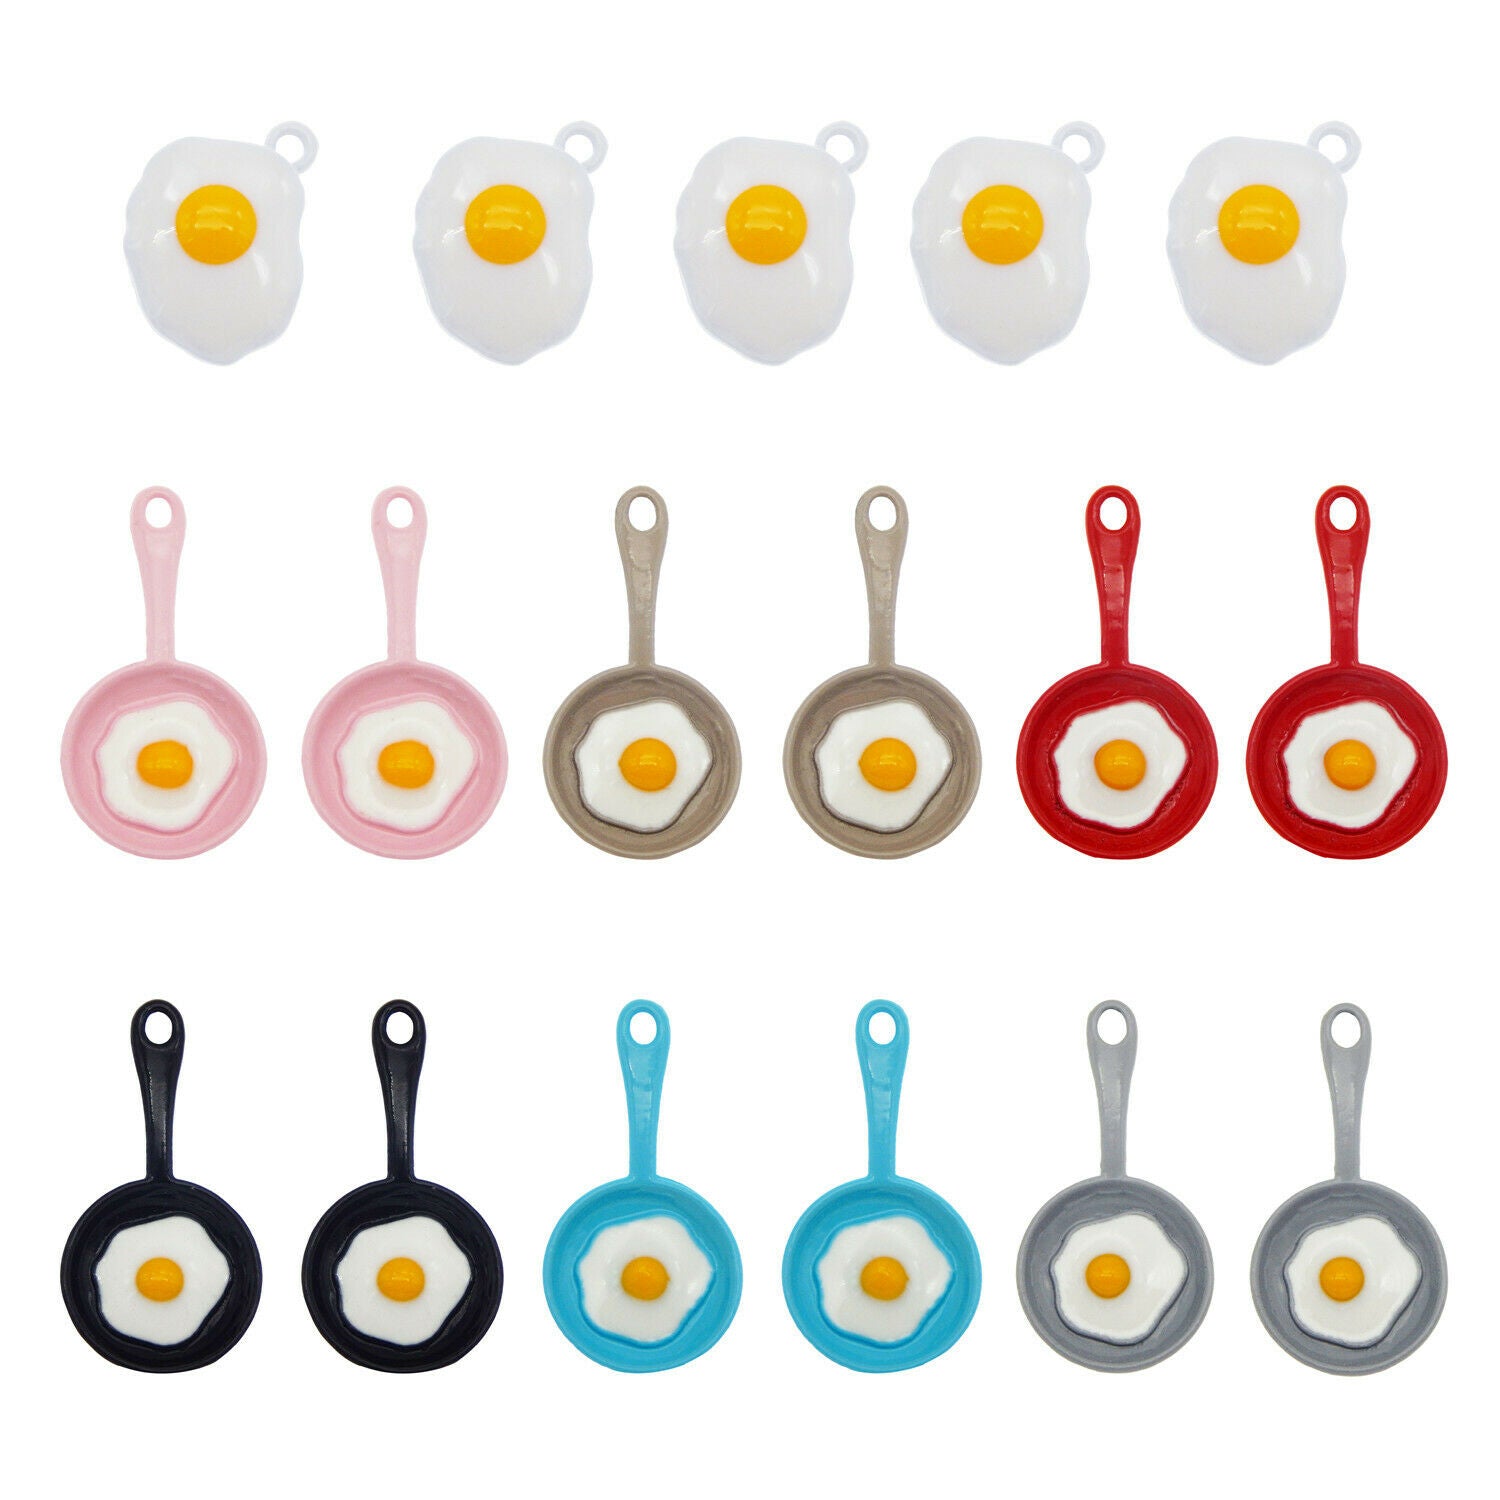 Wholesale Enamel Plated Frying Pan Fried Egg Pendant Charms Findings 14pcs/Pack